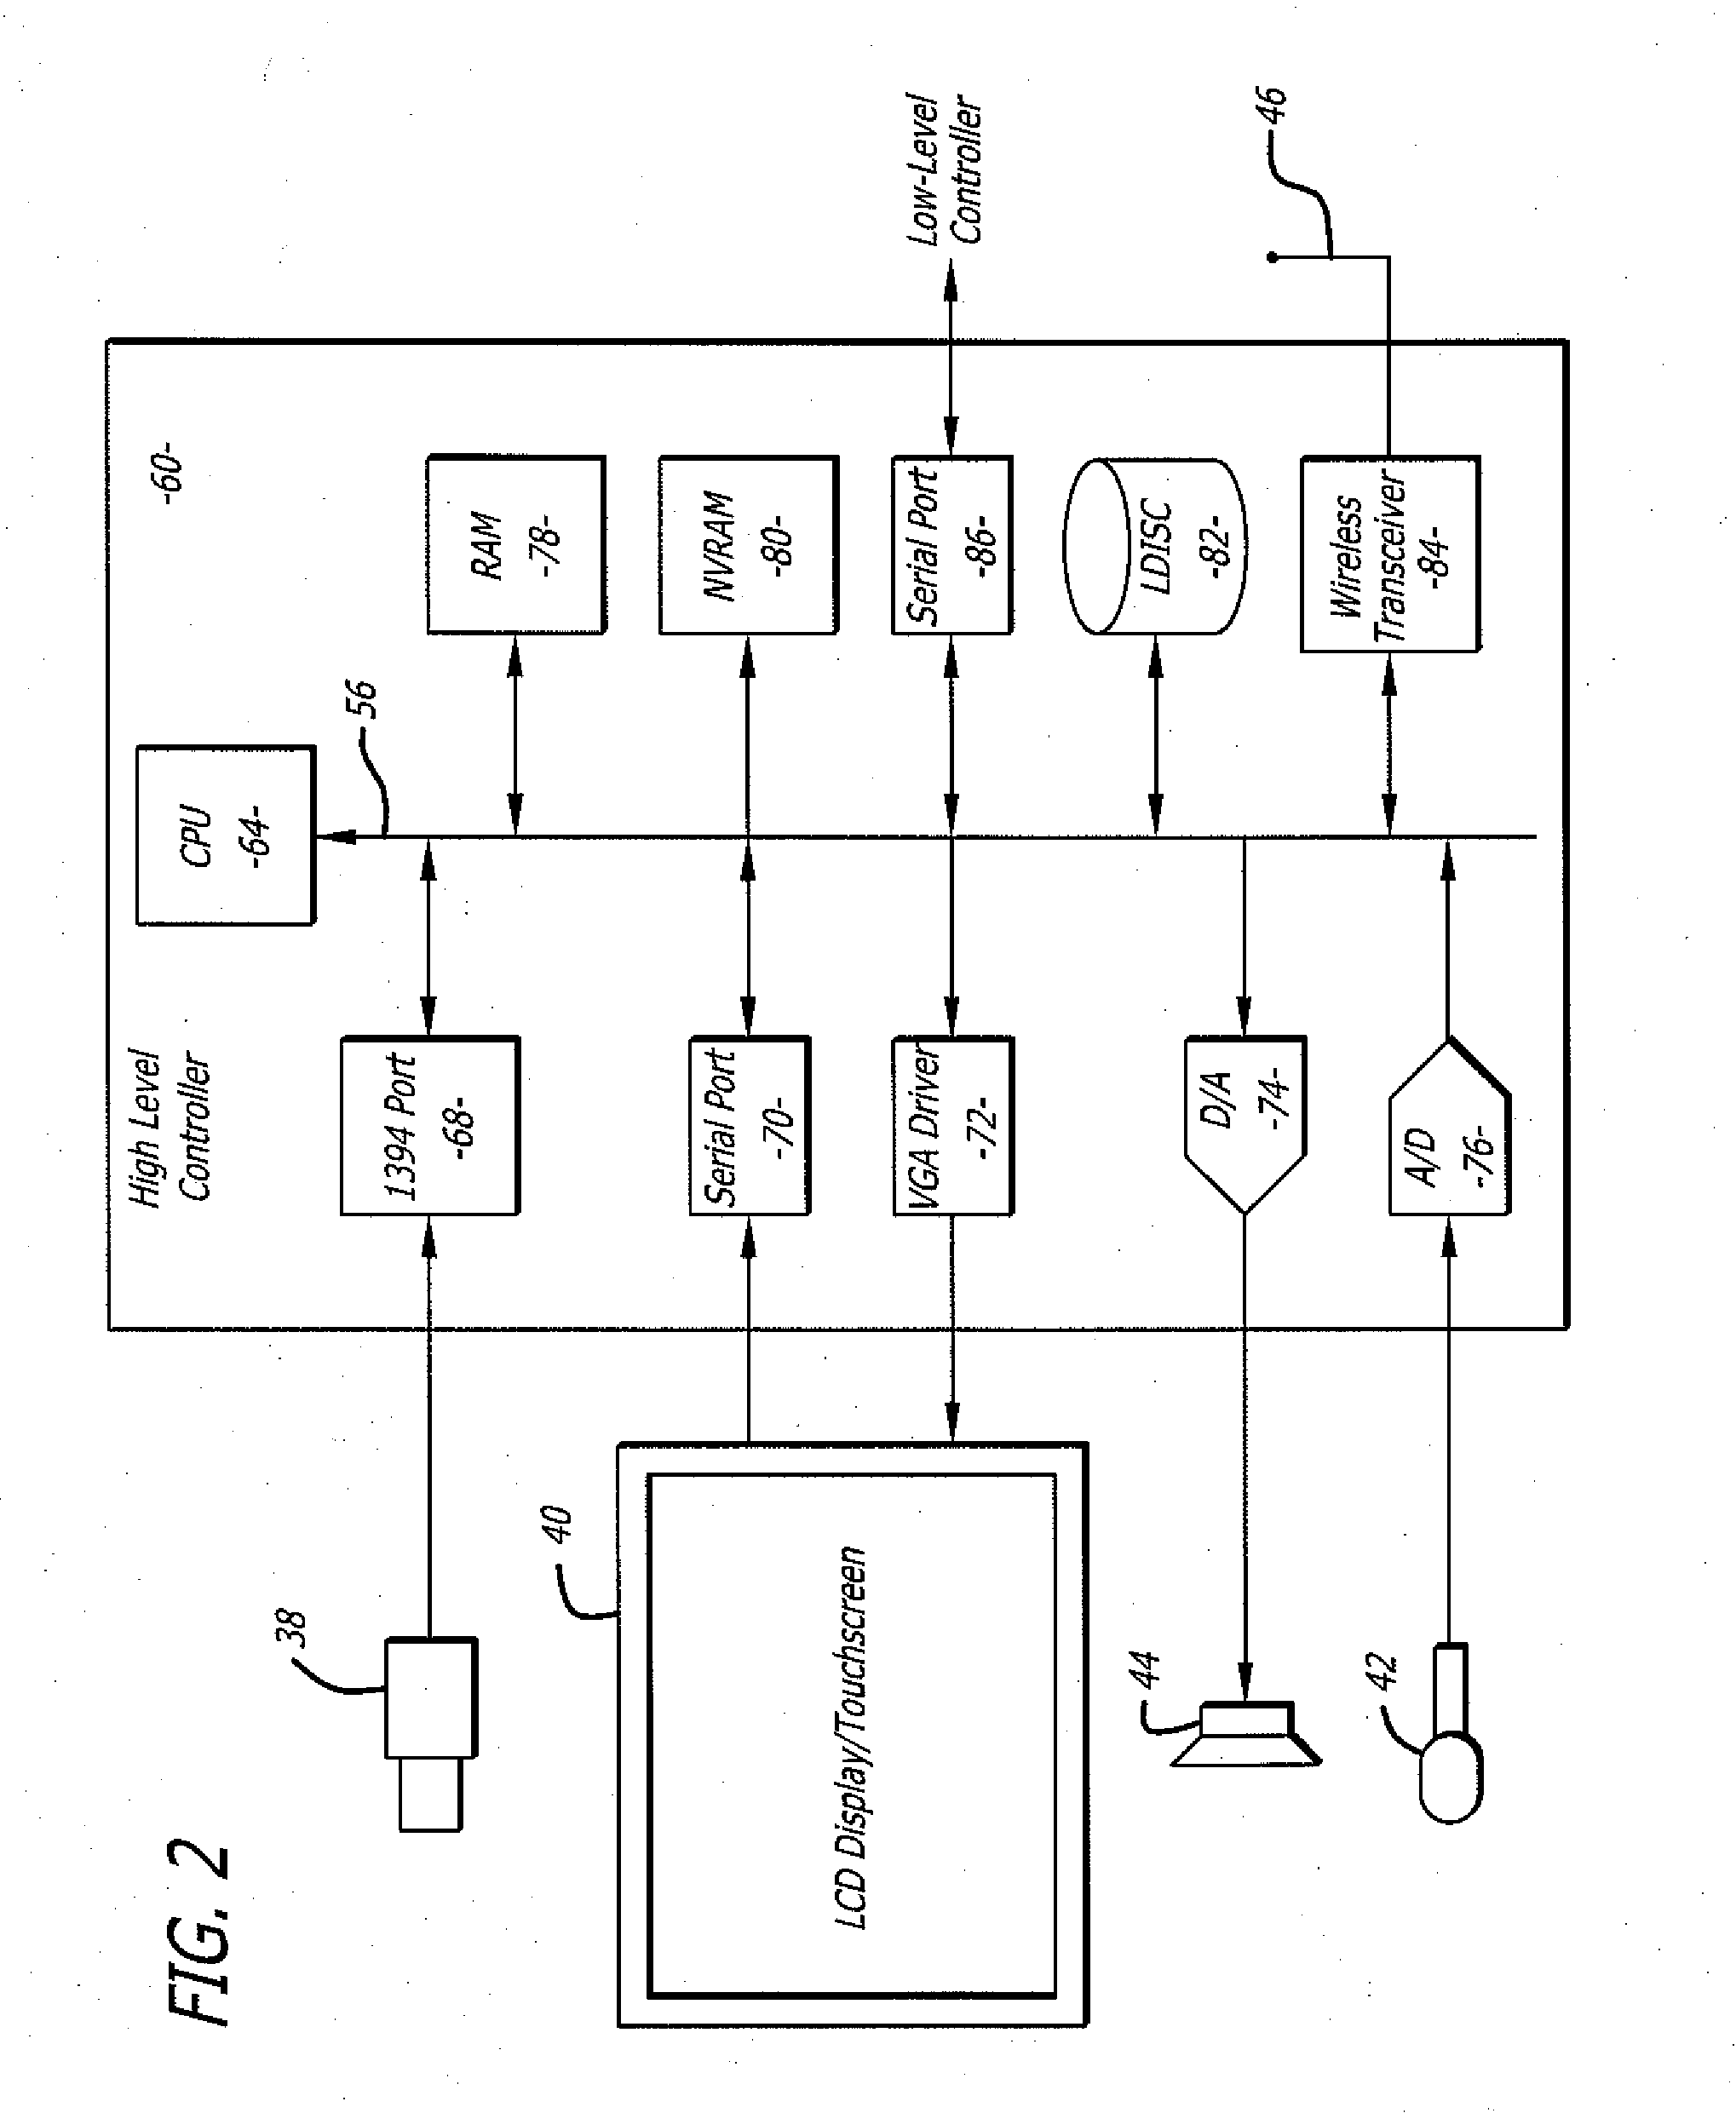 Graphical interface for a remote presence system